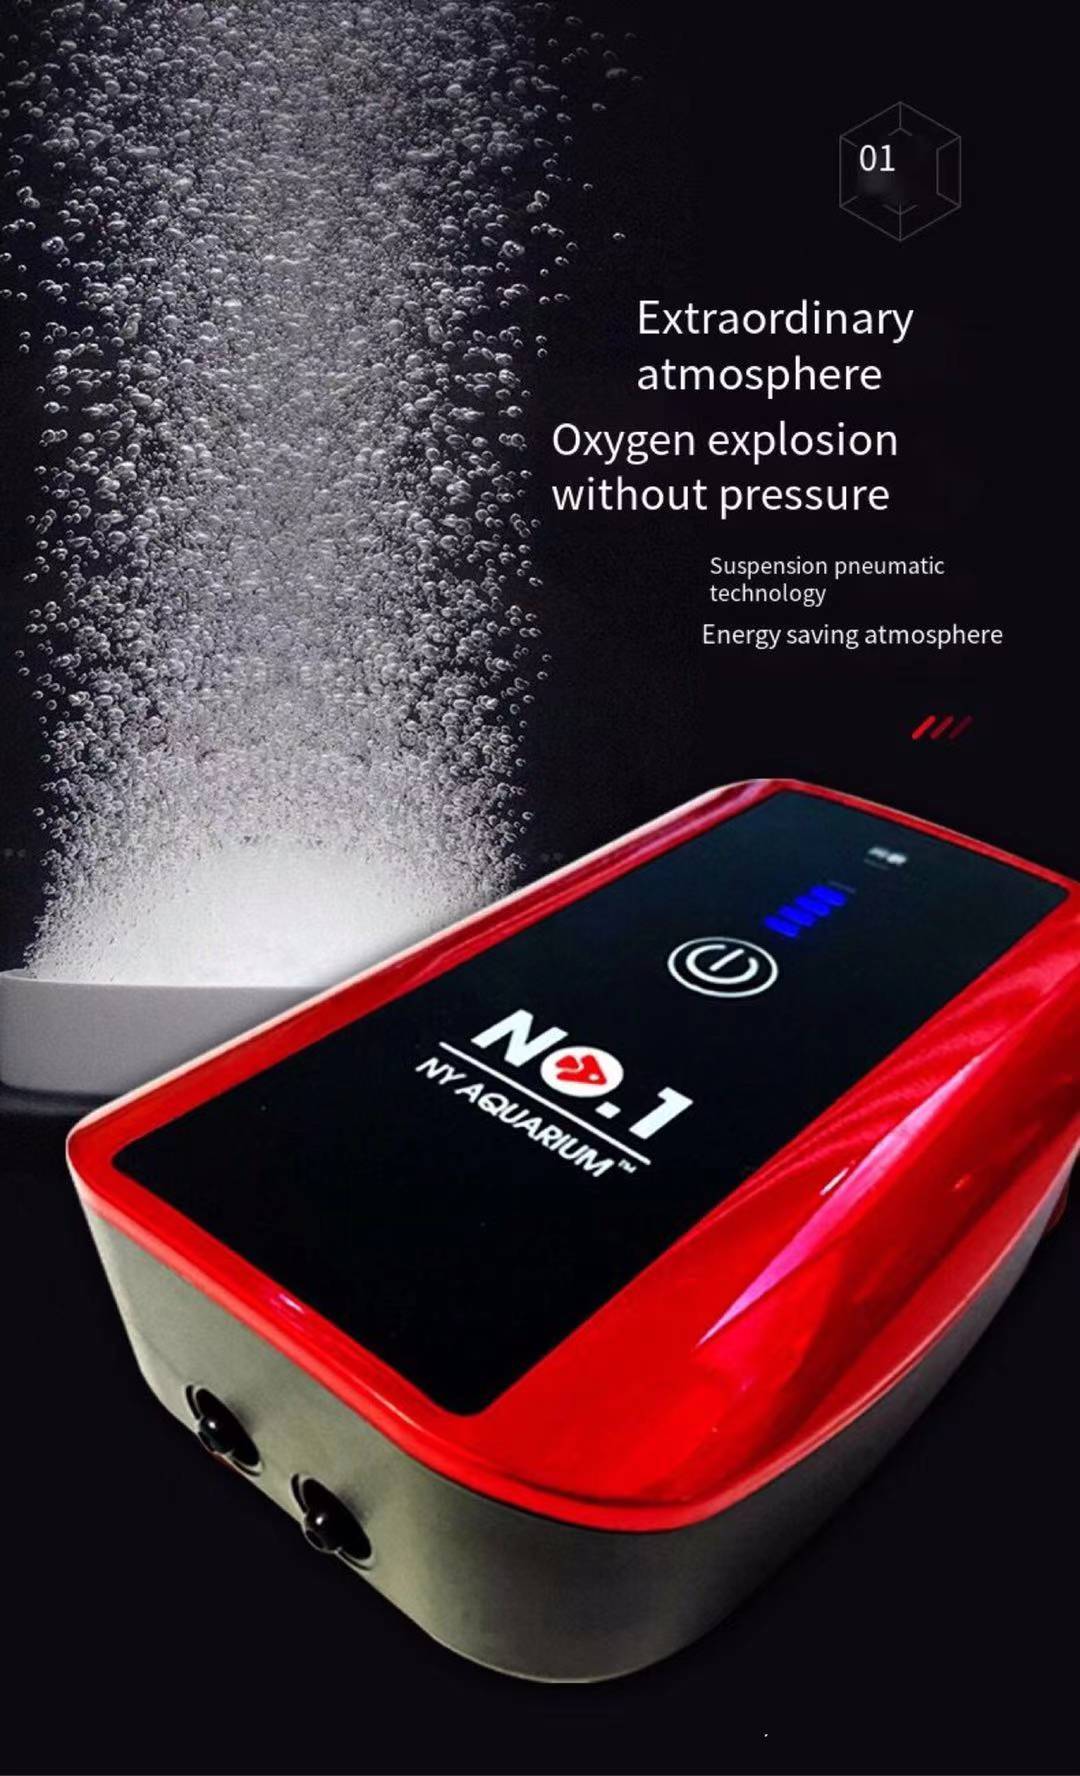 NY Ultra Silent ACDC Air Pump - Mute & Powerful Oxygenation with Battery  Display